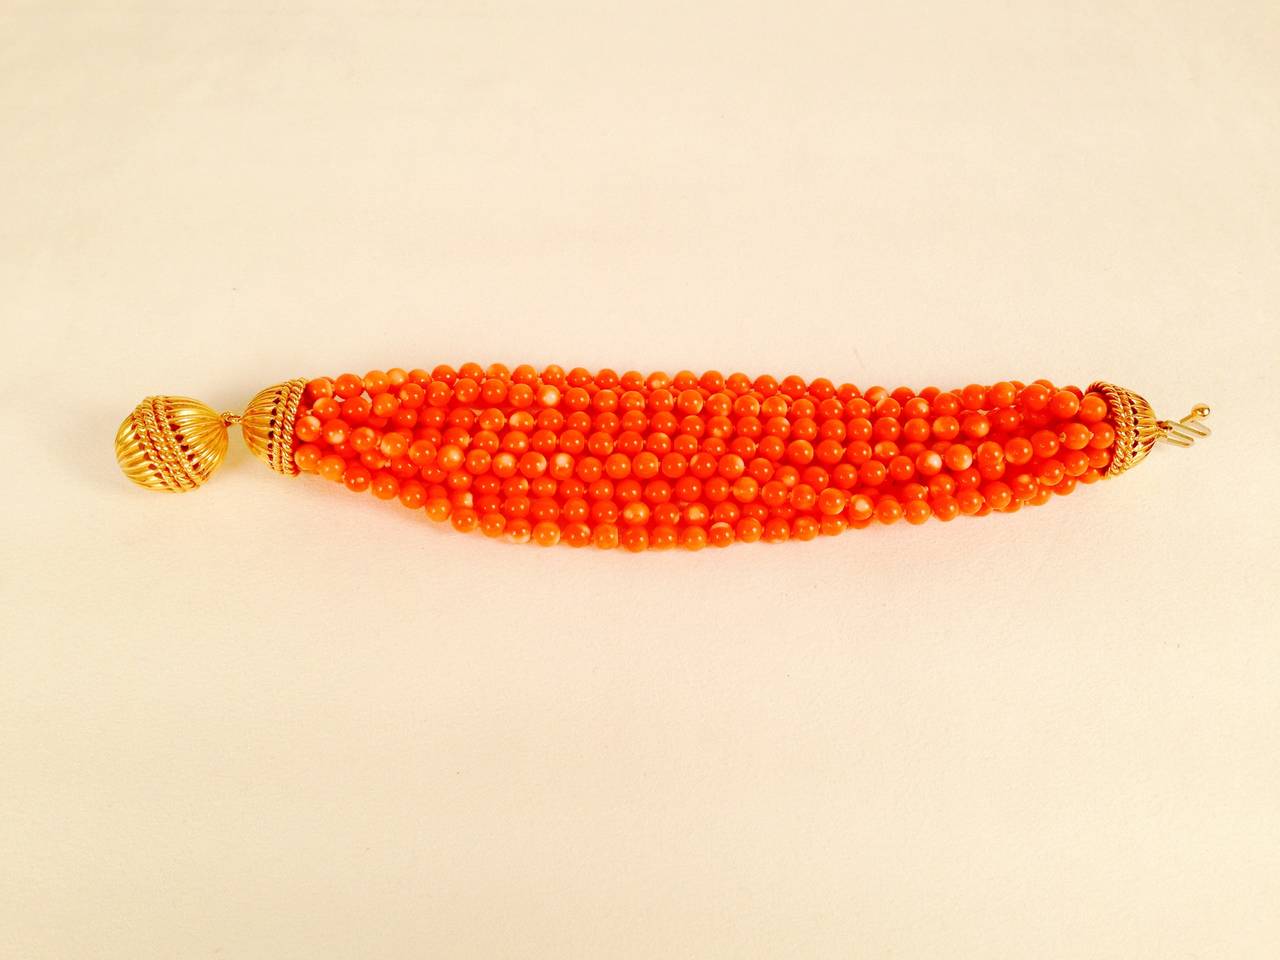 Multi-Strand Coral Bead Bracelet With Heavy Gold Clasp.  This bracelet may be twisted to form an unforgettable torsade!  Features 12 strands of coral ~ 5.5mm and a heavy 14 karat yellow gold clasp and end caps.  The bracelet is 9